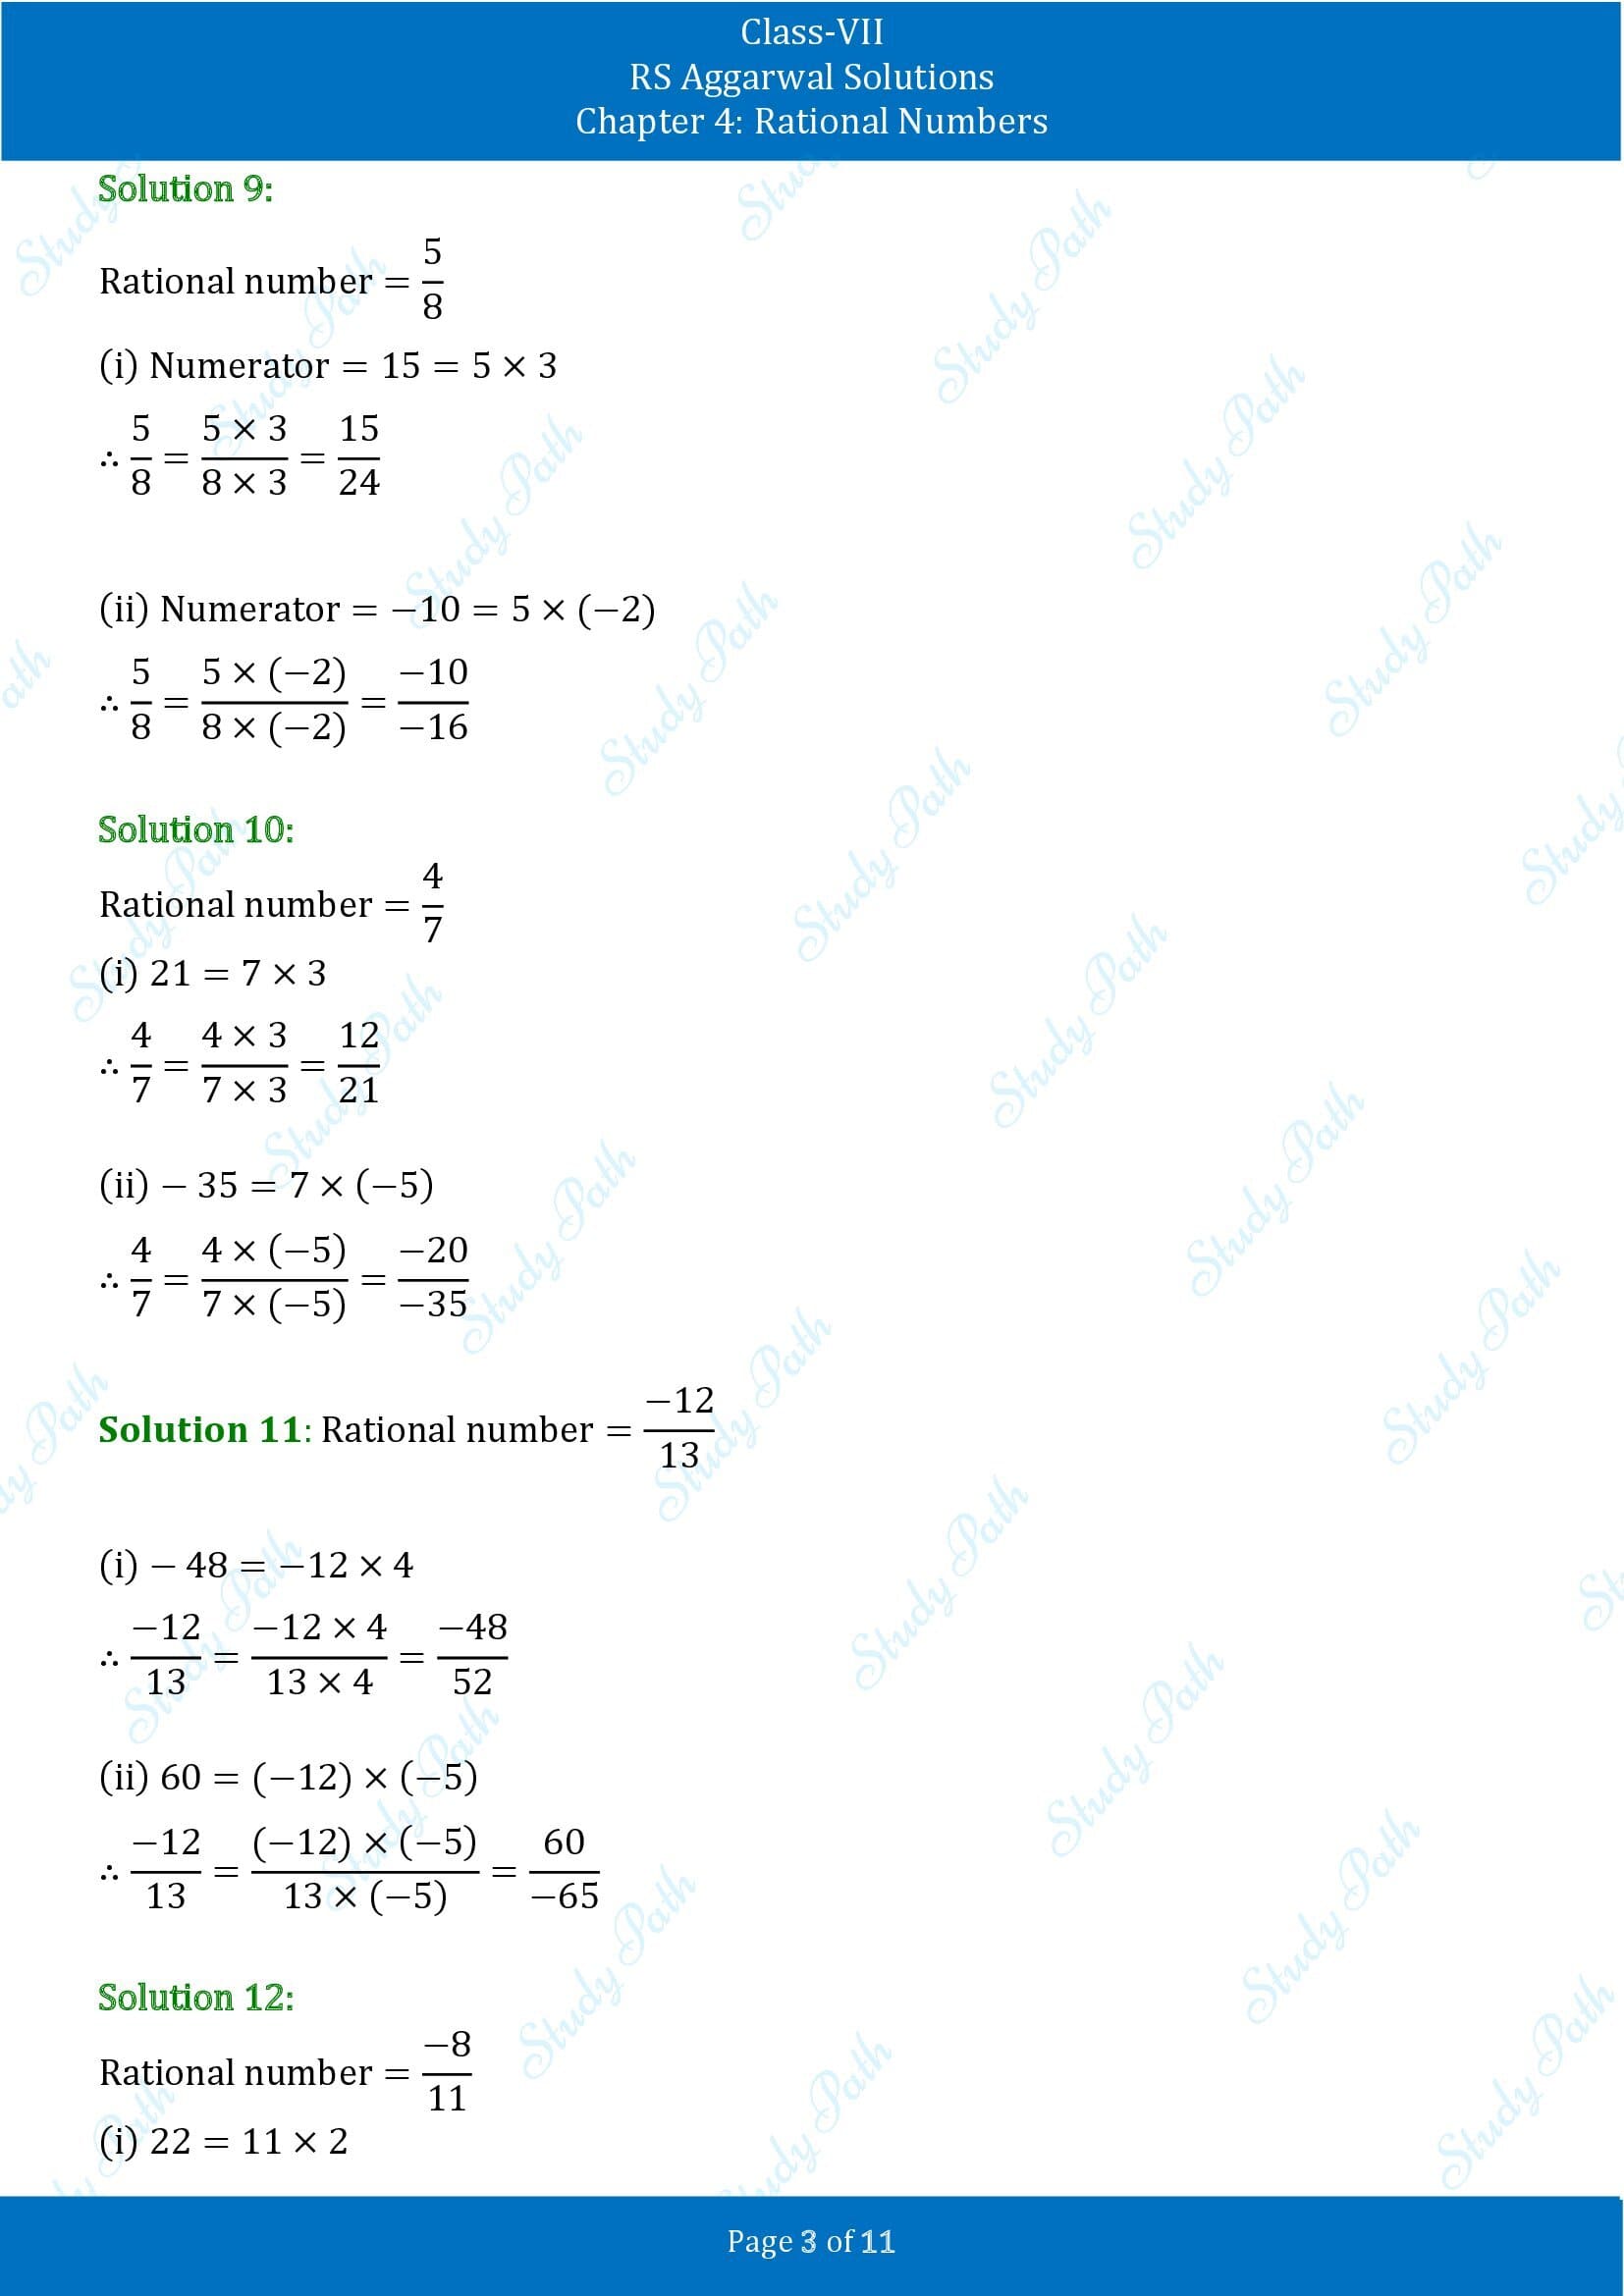 RS Aggarwal Solutions Class 7 Chapter 4 Rational Numbers Exercise 4A 00003